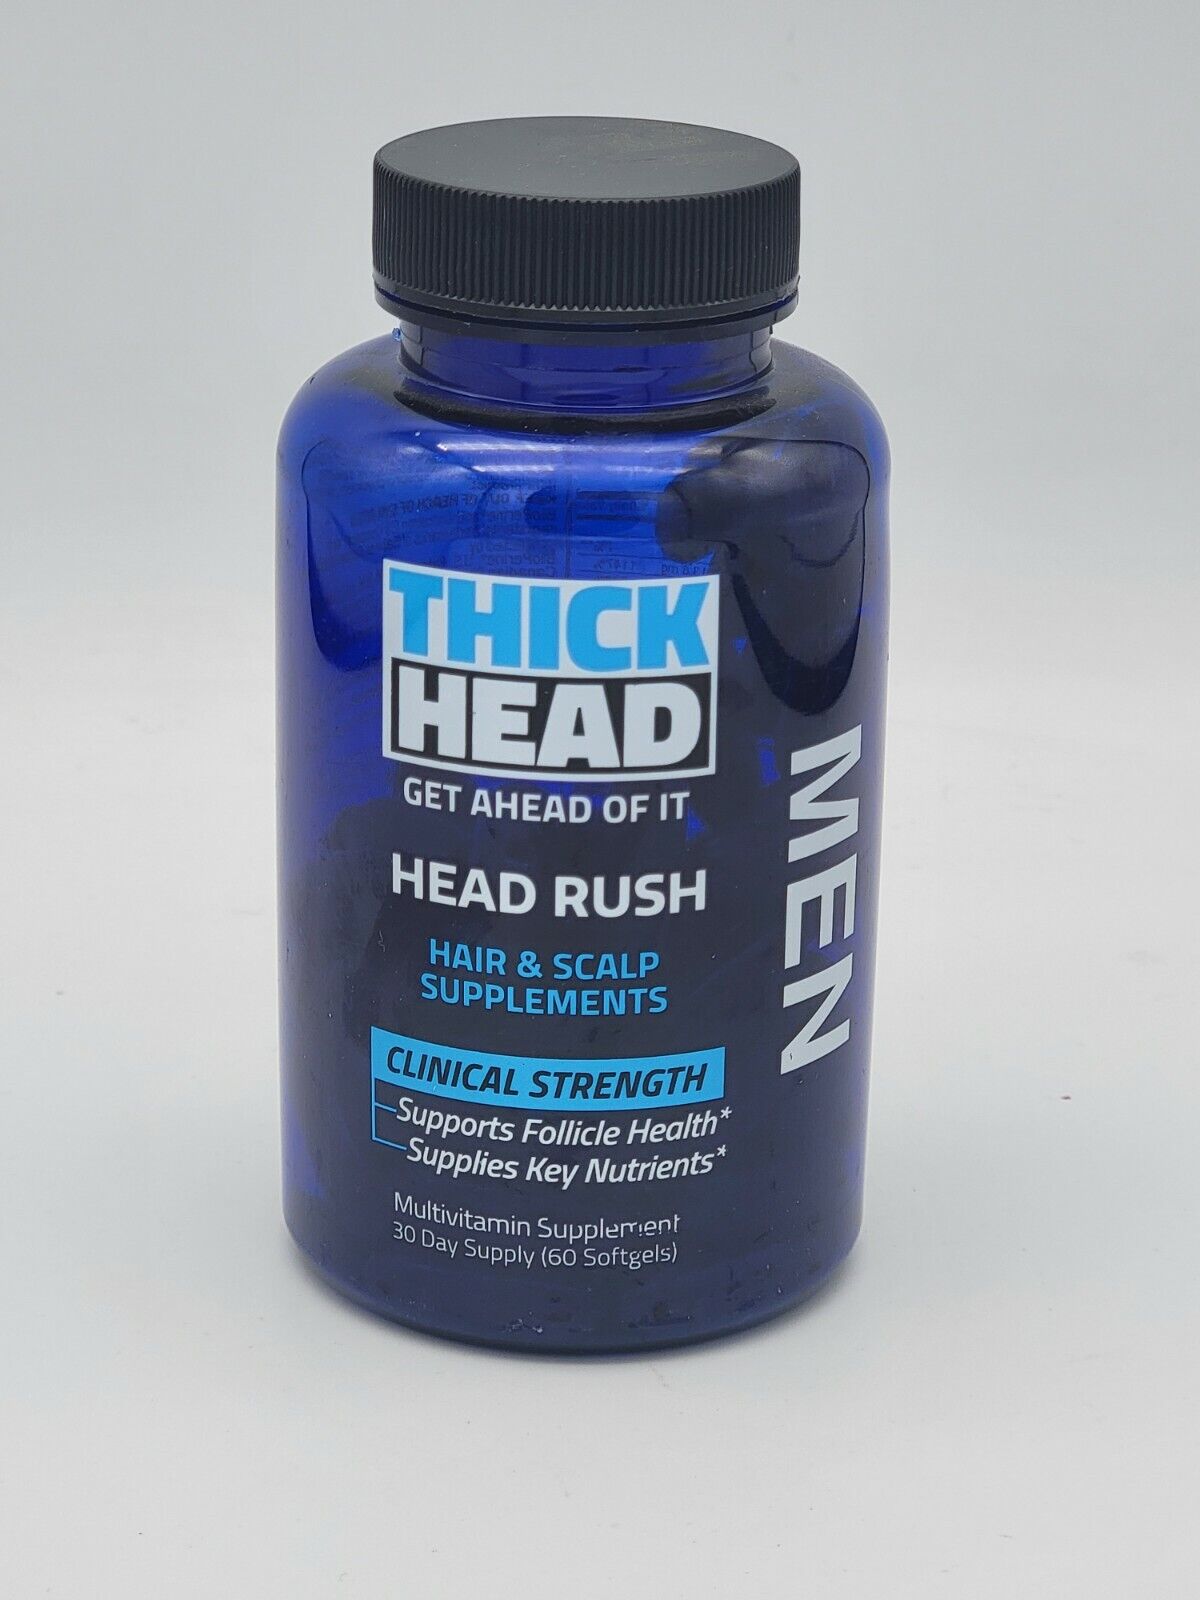 THICK HEAD Get Ahead of It HEAD RUSH Clinical Strength 30 Day Supply